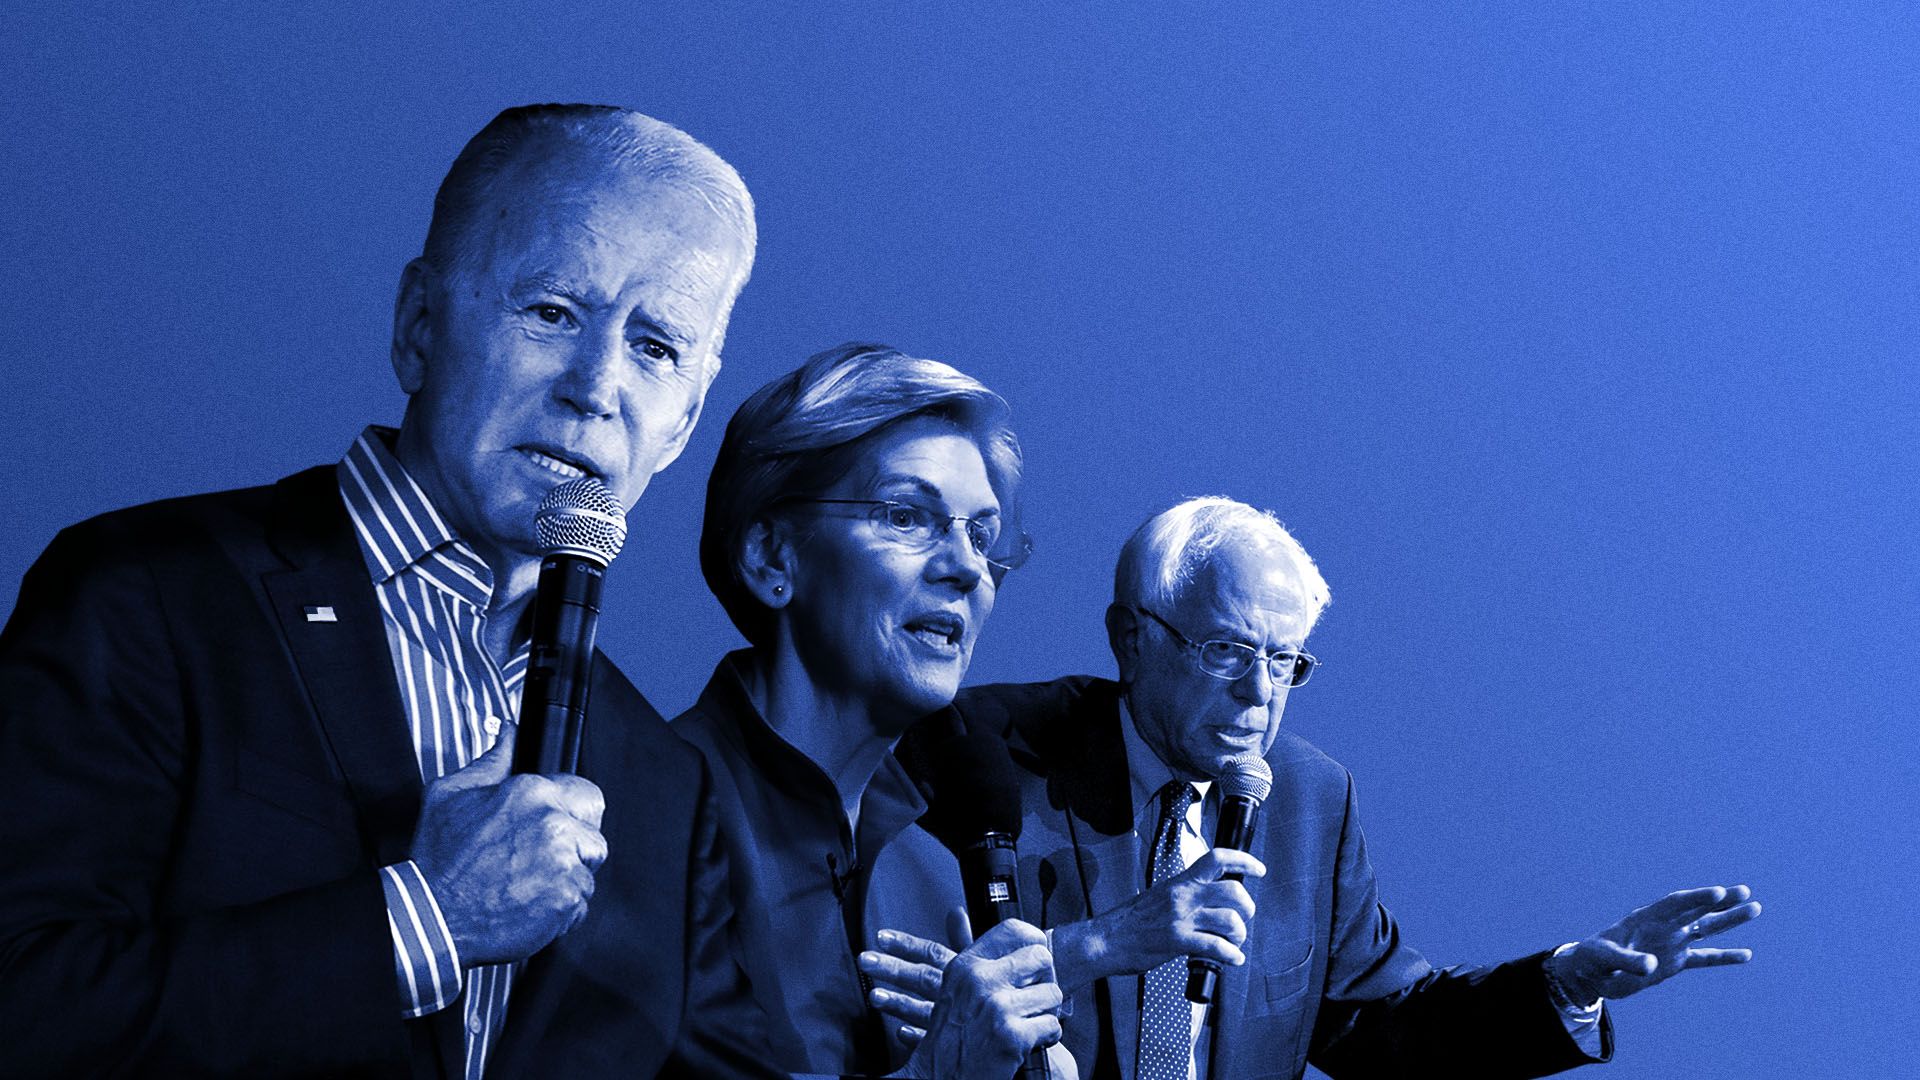 Illustration of Vice President Biden, and senators Warren and Sanders positioned as if  prepping for a race